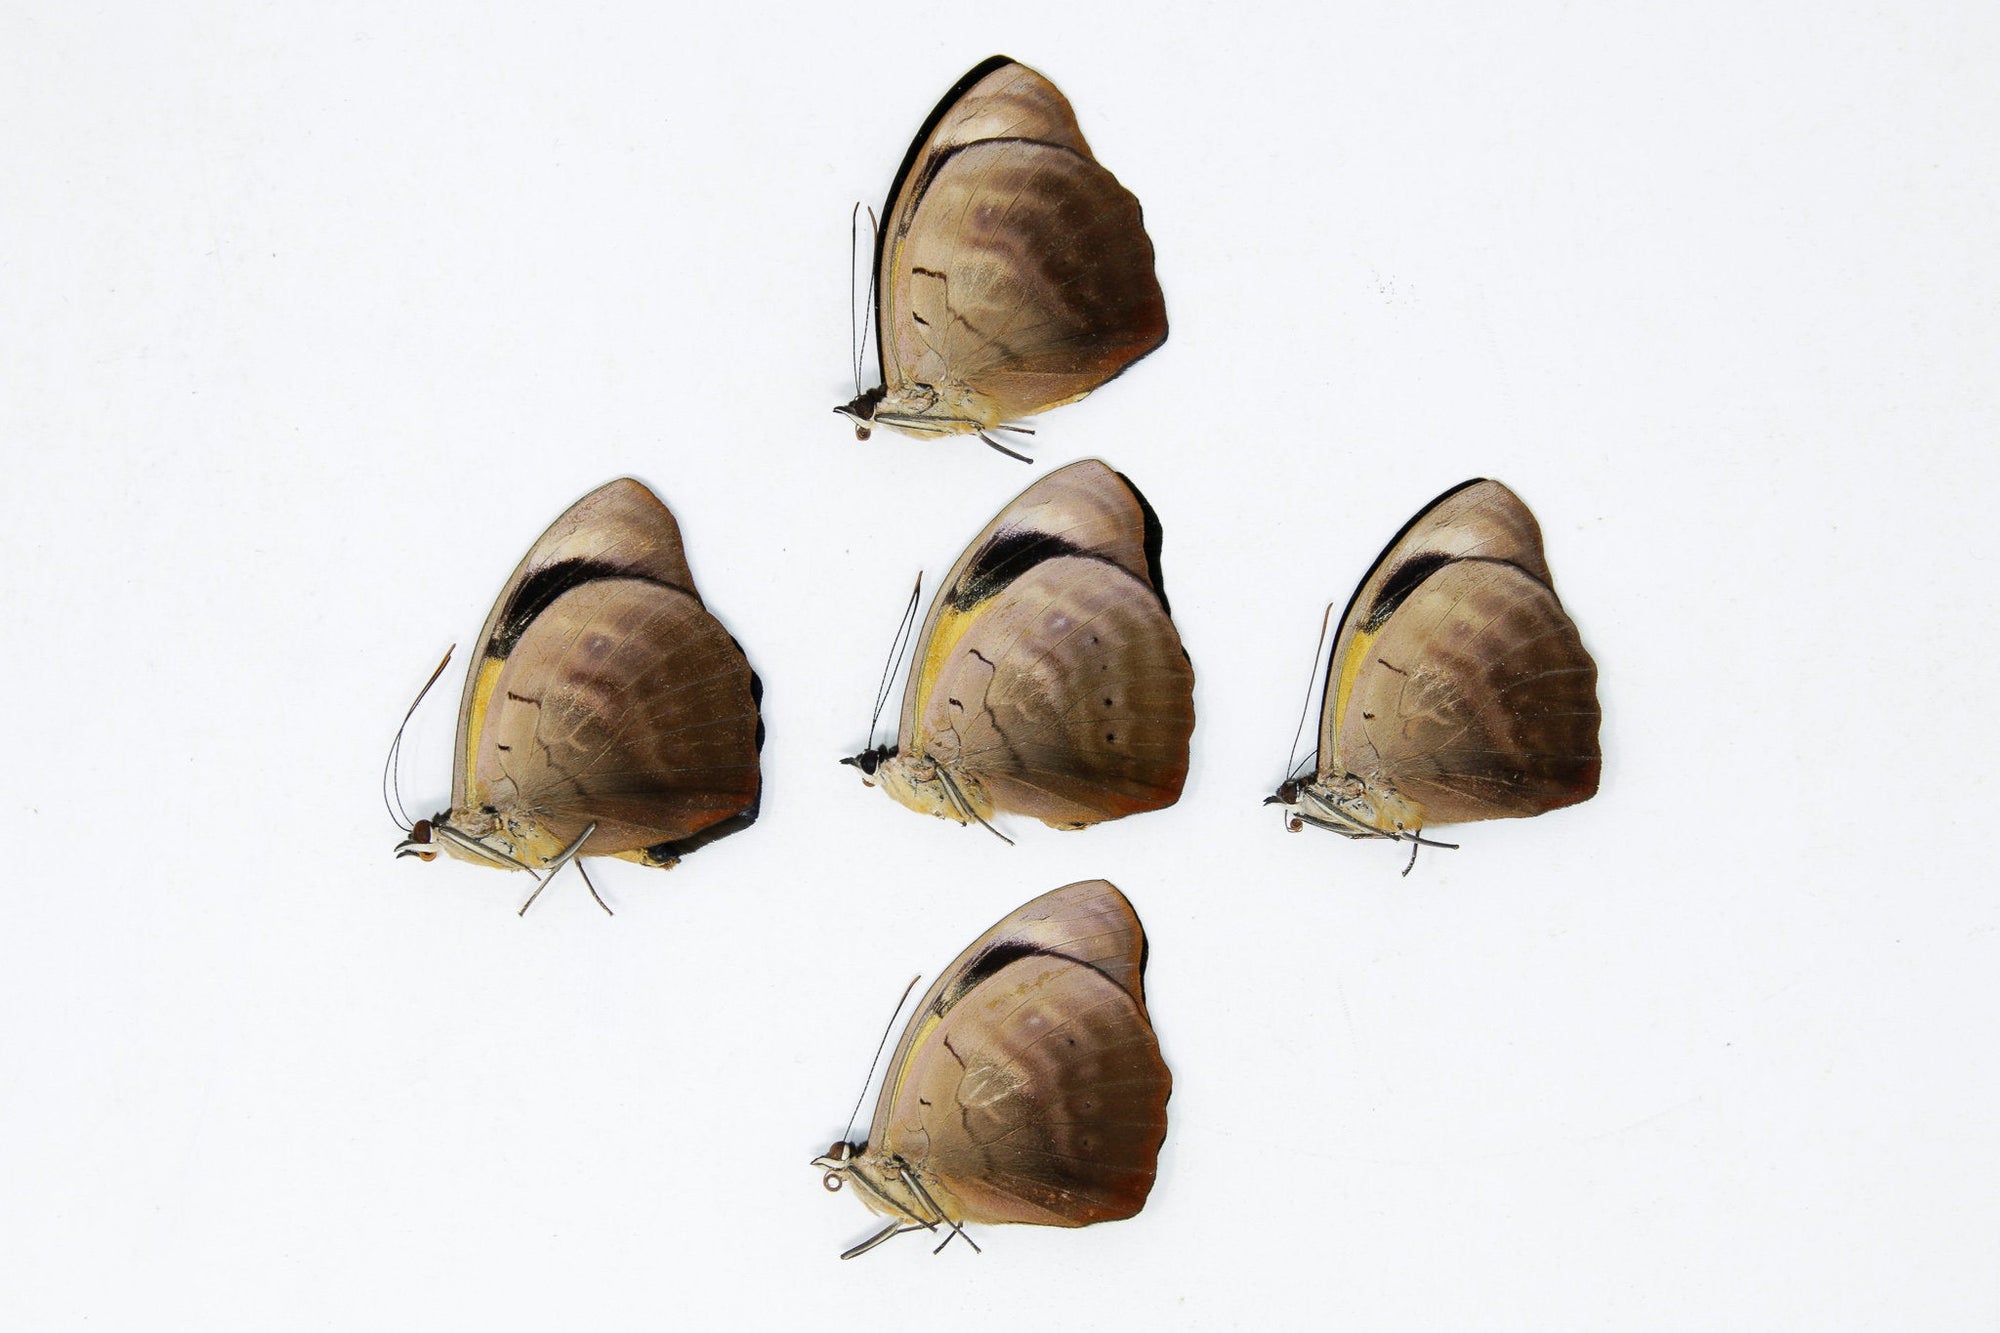 5 x Catonephele numilia | The Blue-frosted Catone Butterflies | A1 Unmounted Specimens